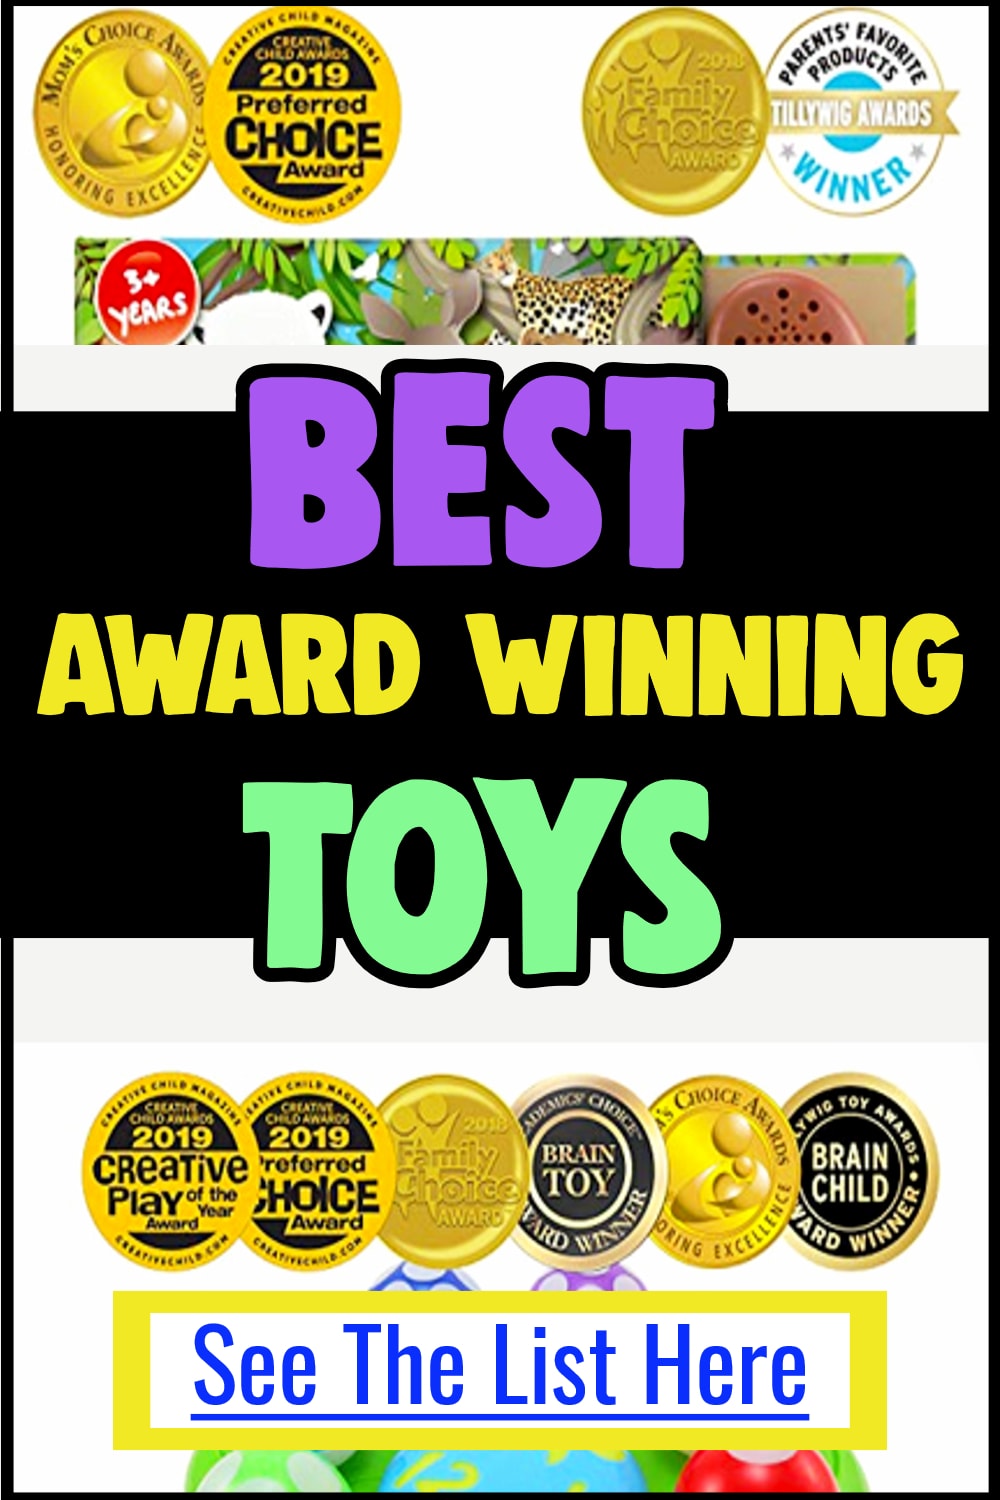 Toys! Best Toys 2019 - 2020 from the Toy Awards - Award Winning Toys! Best toys for 1 year old , 2 year olds or 3 year old toddlers - best toddler toys for girls and for boys - educational toys for toddlers and preschoolers - toddler toys for Christmas helps with What to buy 1 year old for Christmas - educational and FUN Christmas toys for kids and birthday gift toys - Toy Gift Guide